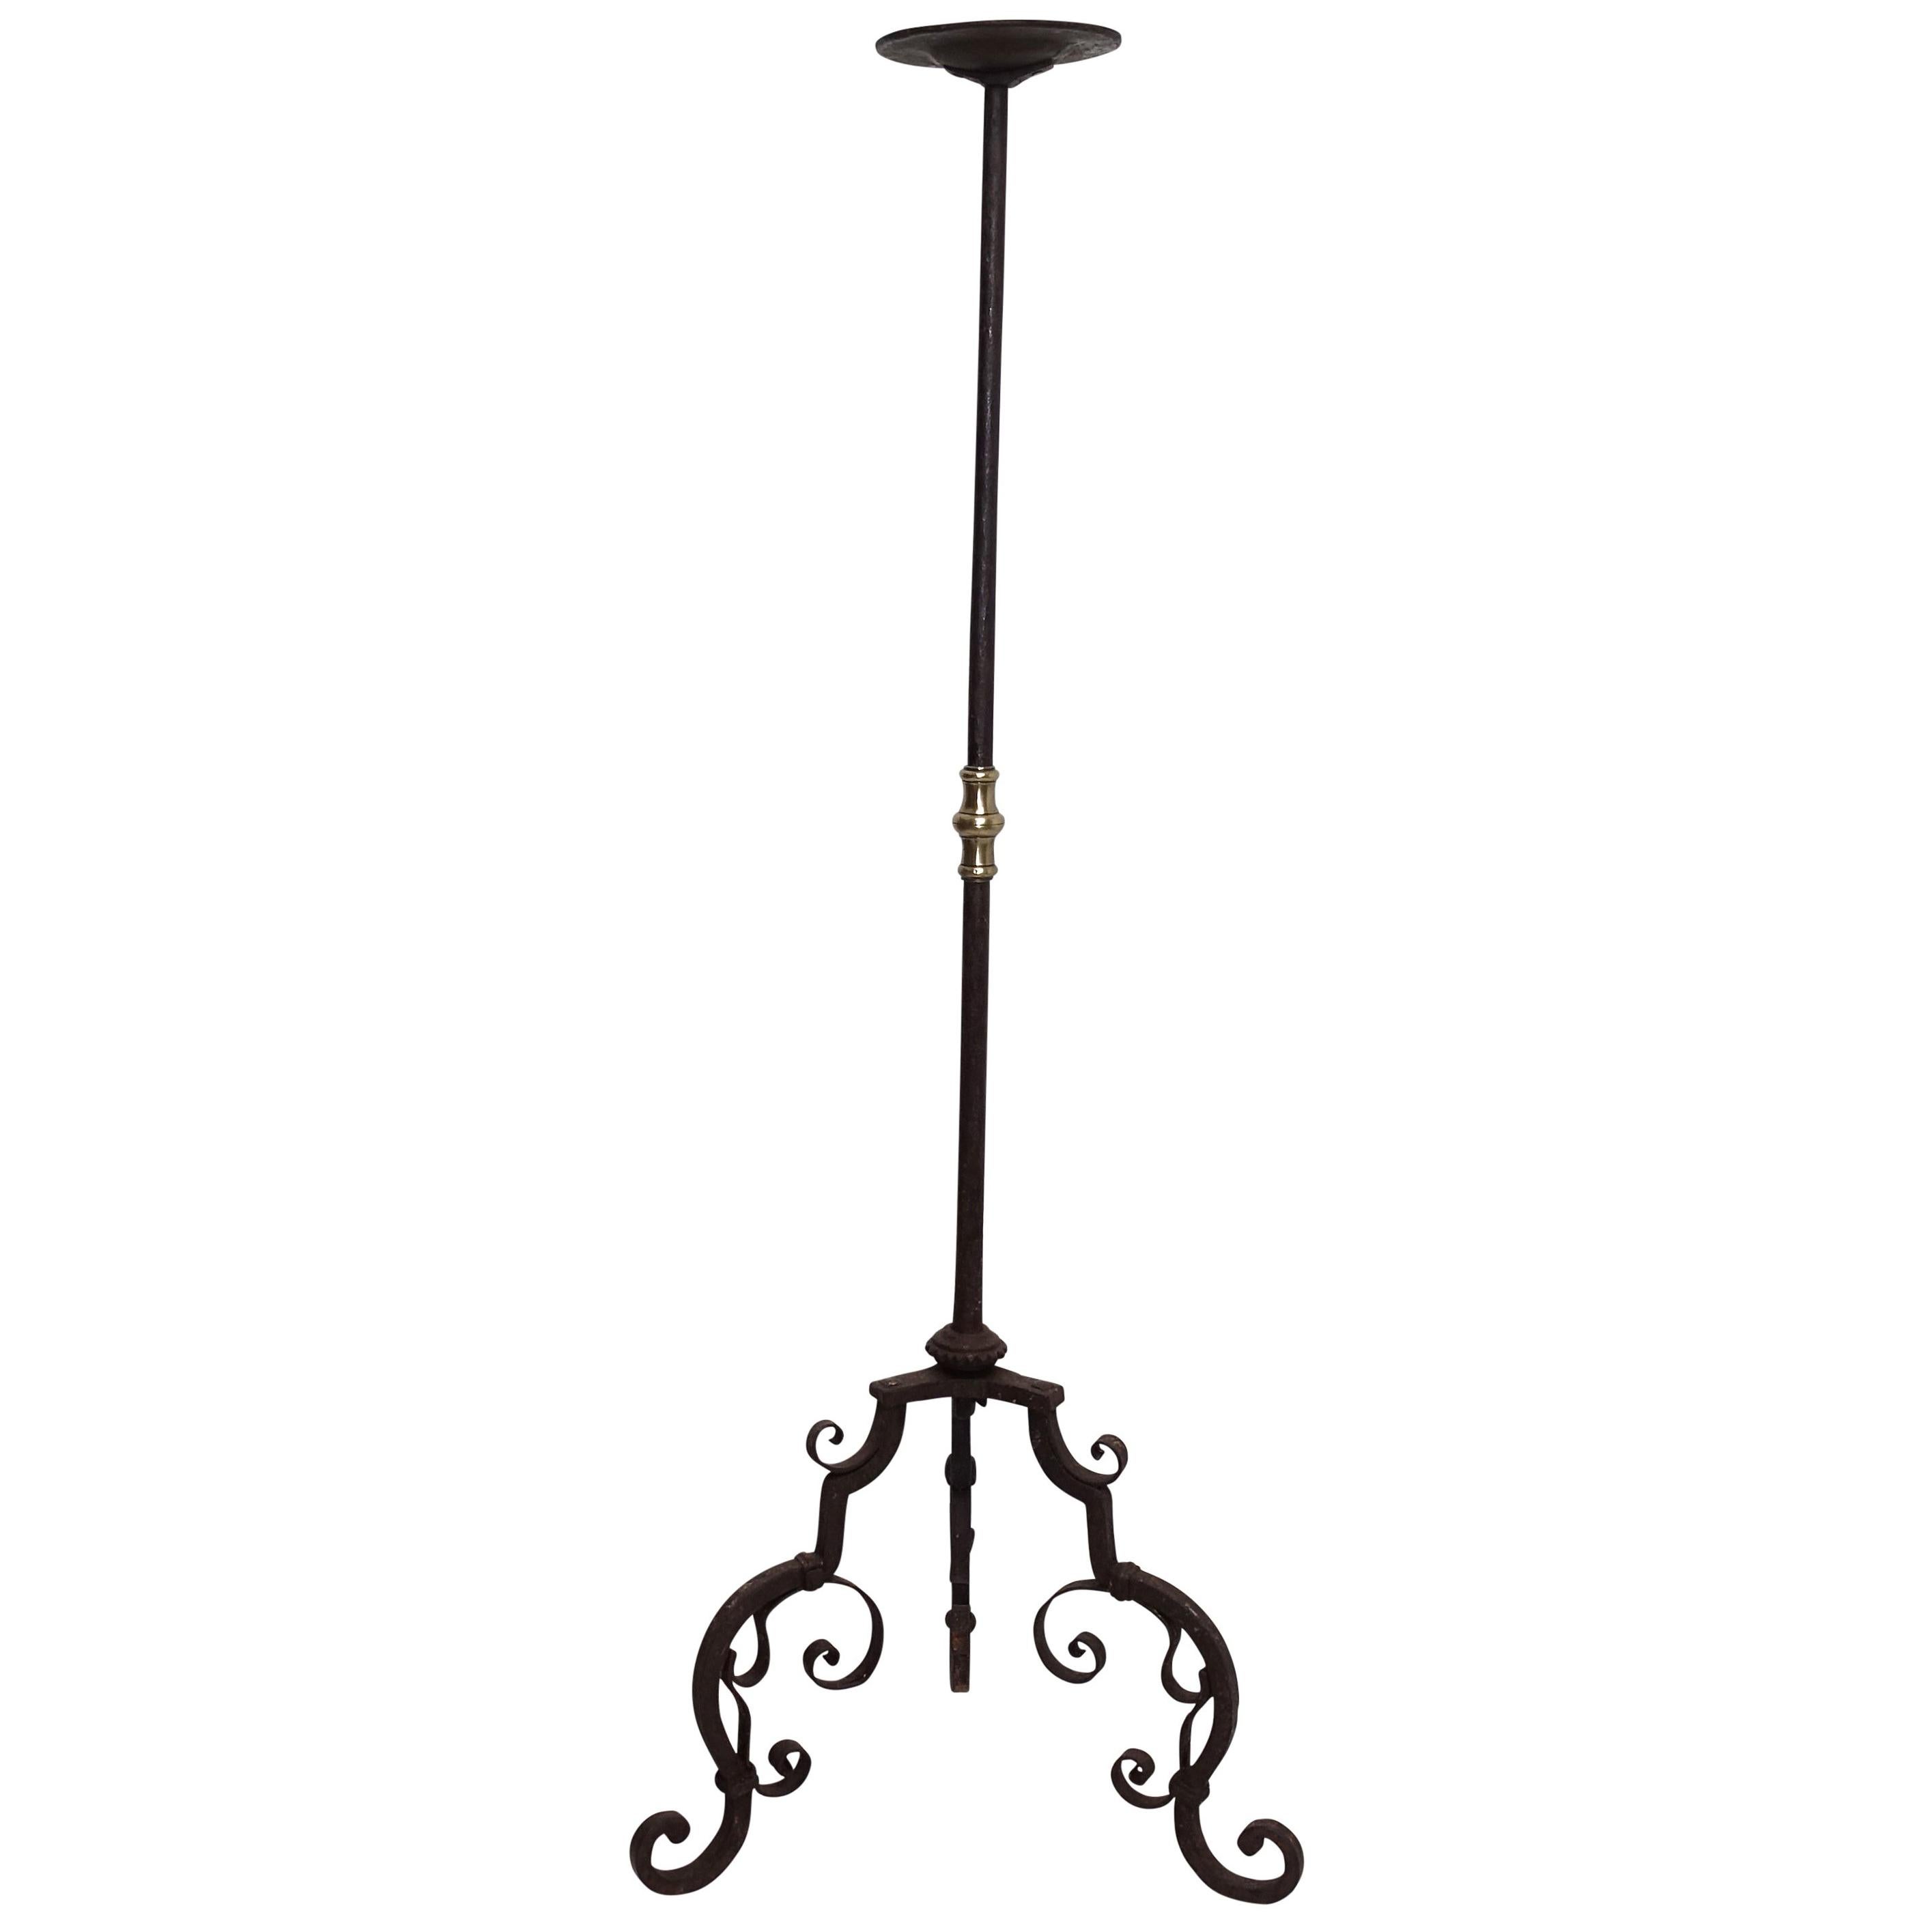 Wrought Iron Torchiere Candle Stand, European, 18th Century